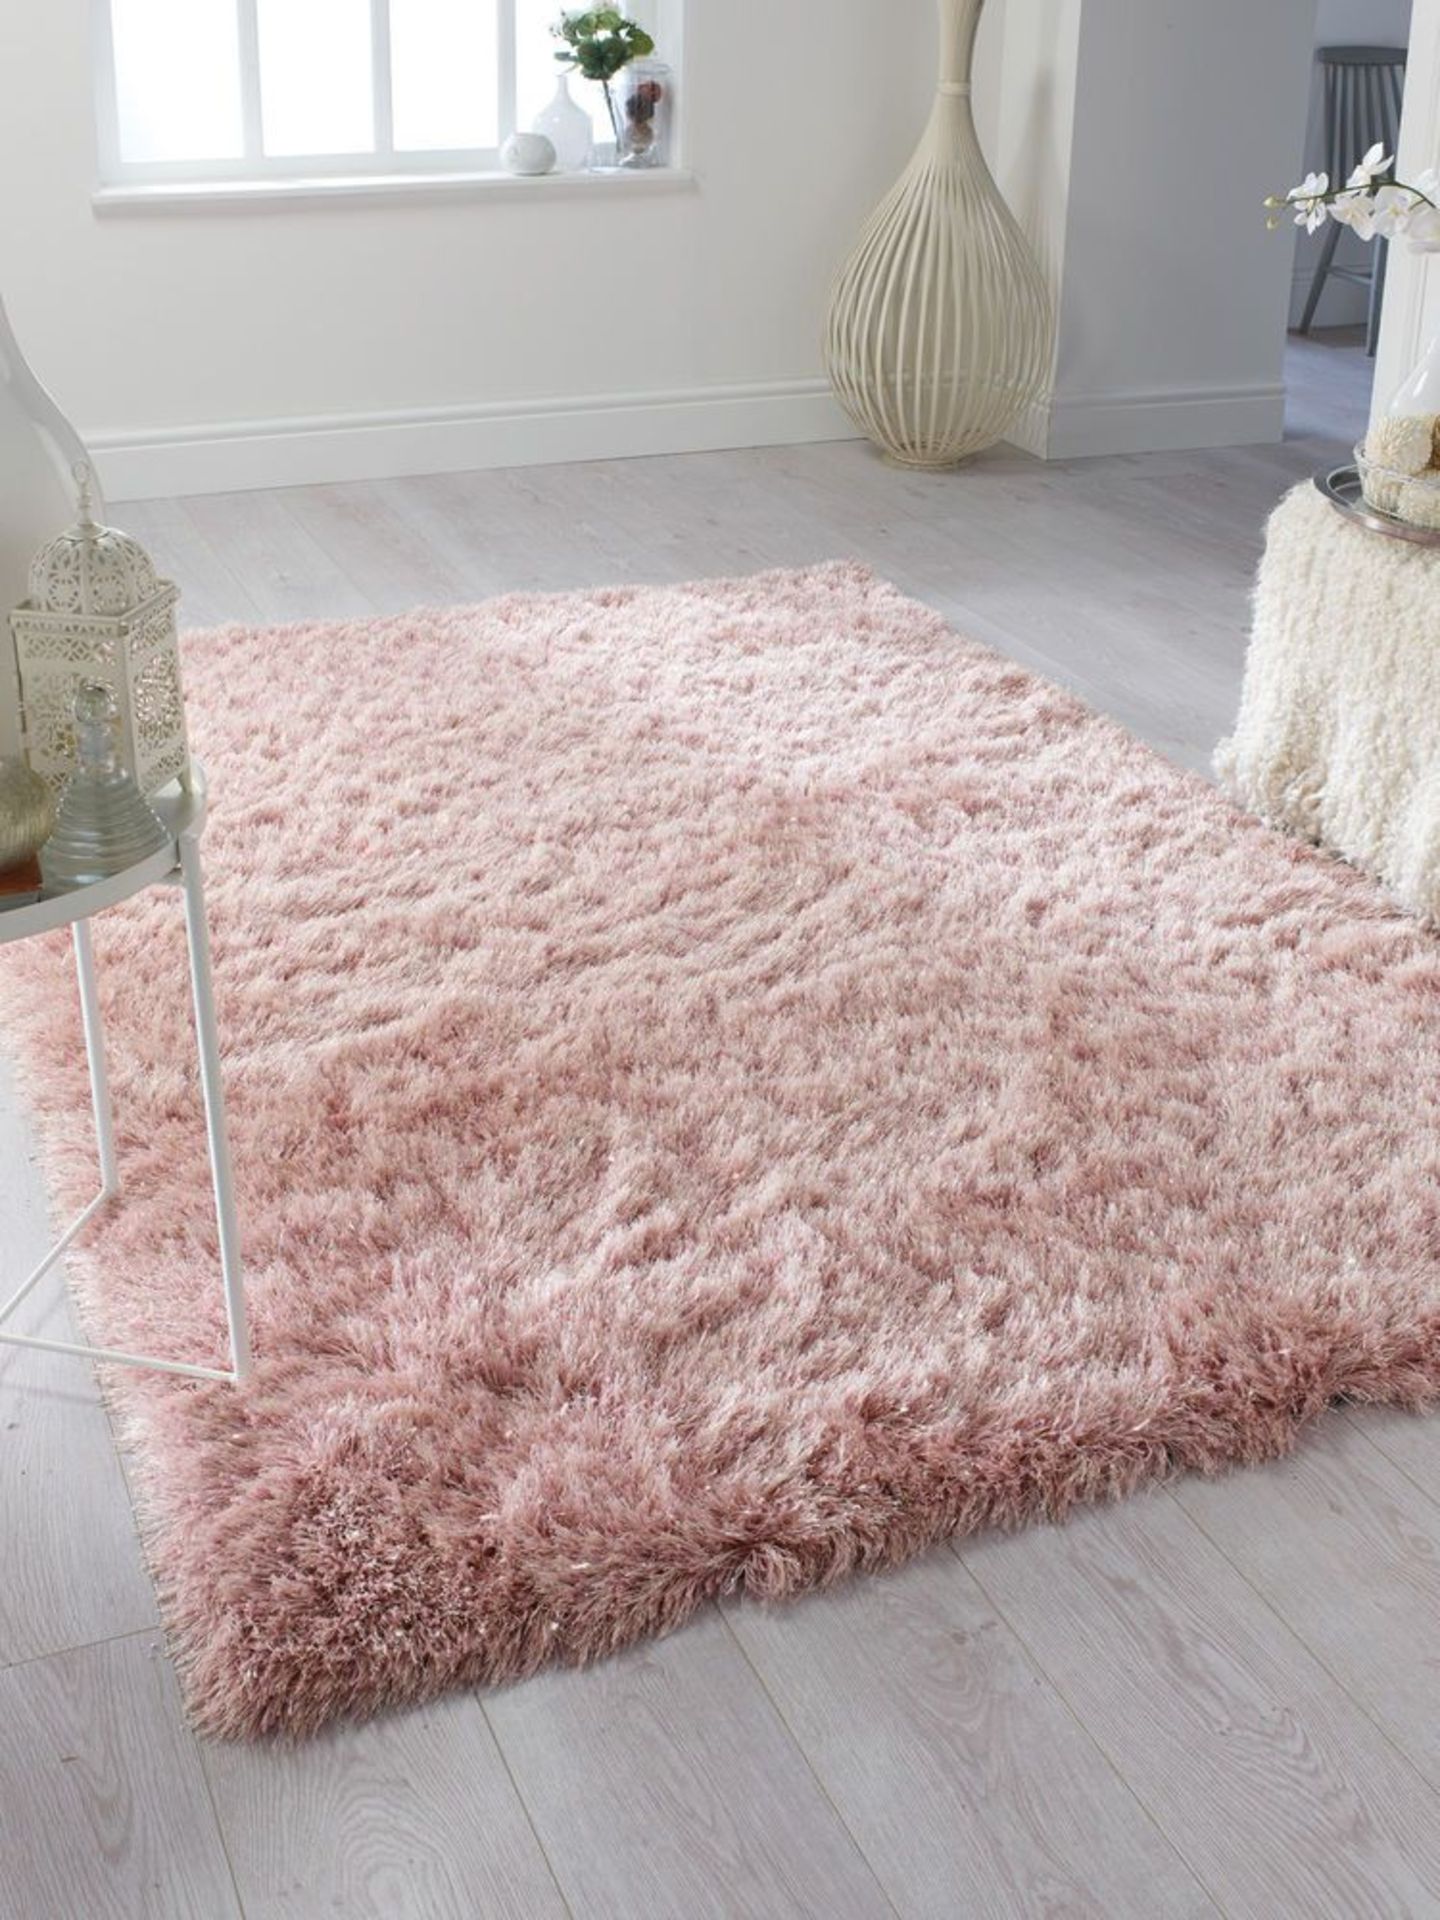 4 X BRAND NEW GLAMOUR SHIMMER 80 X 150 LUXURY RUGS BLUSH R12-2